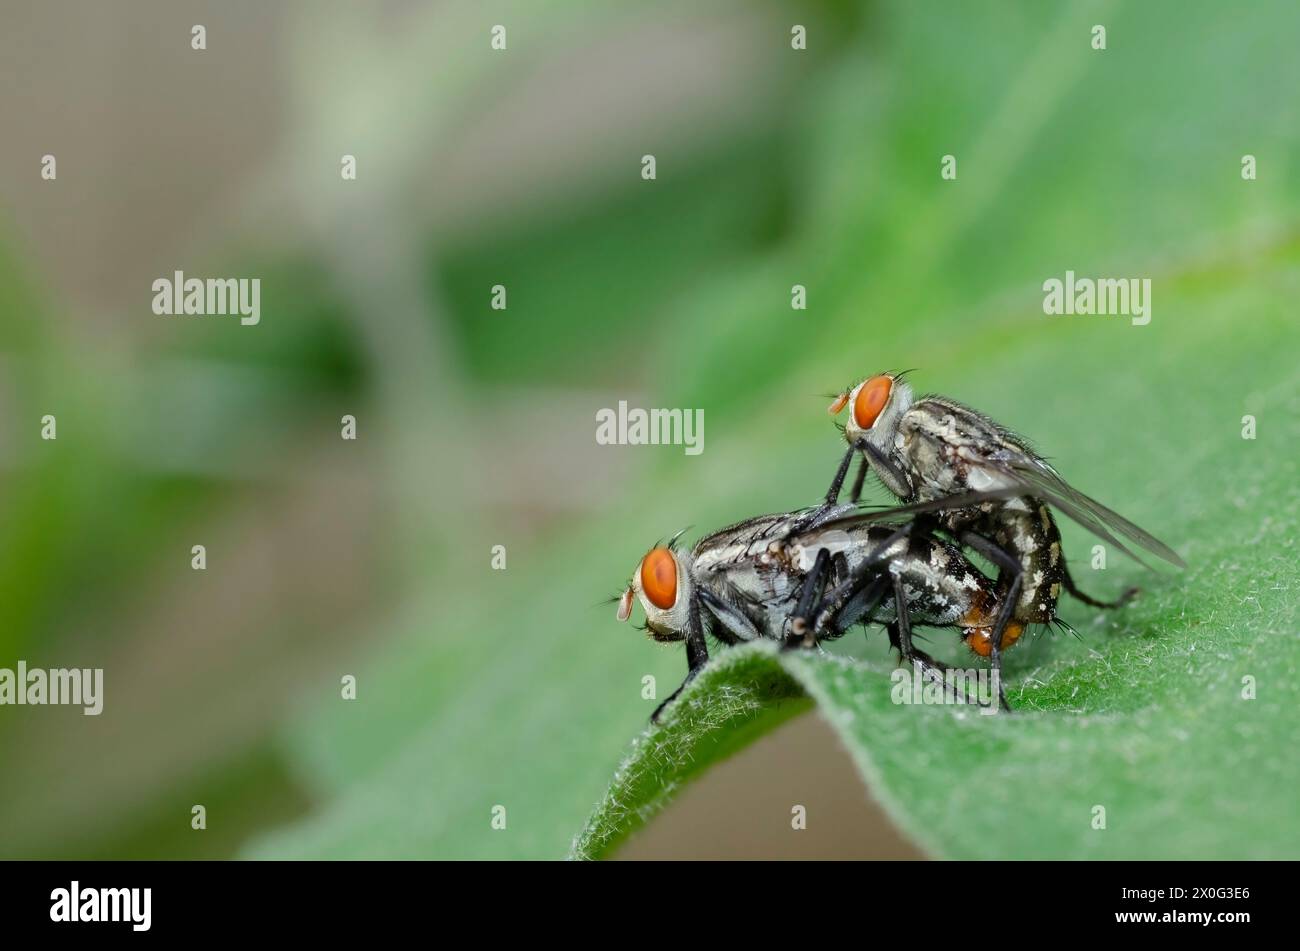 Two mating flies Stock Photo